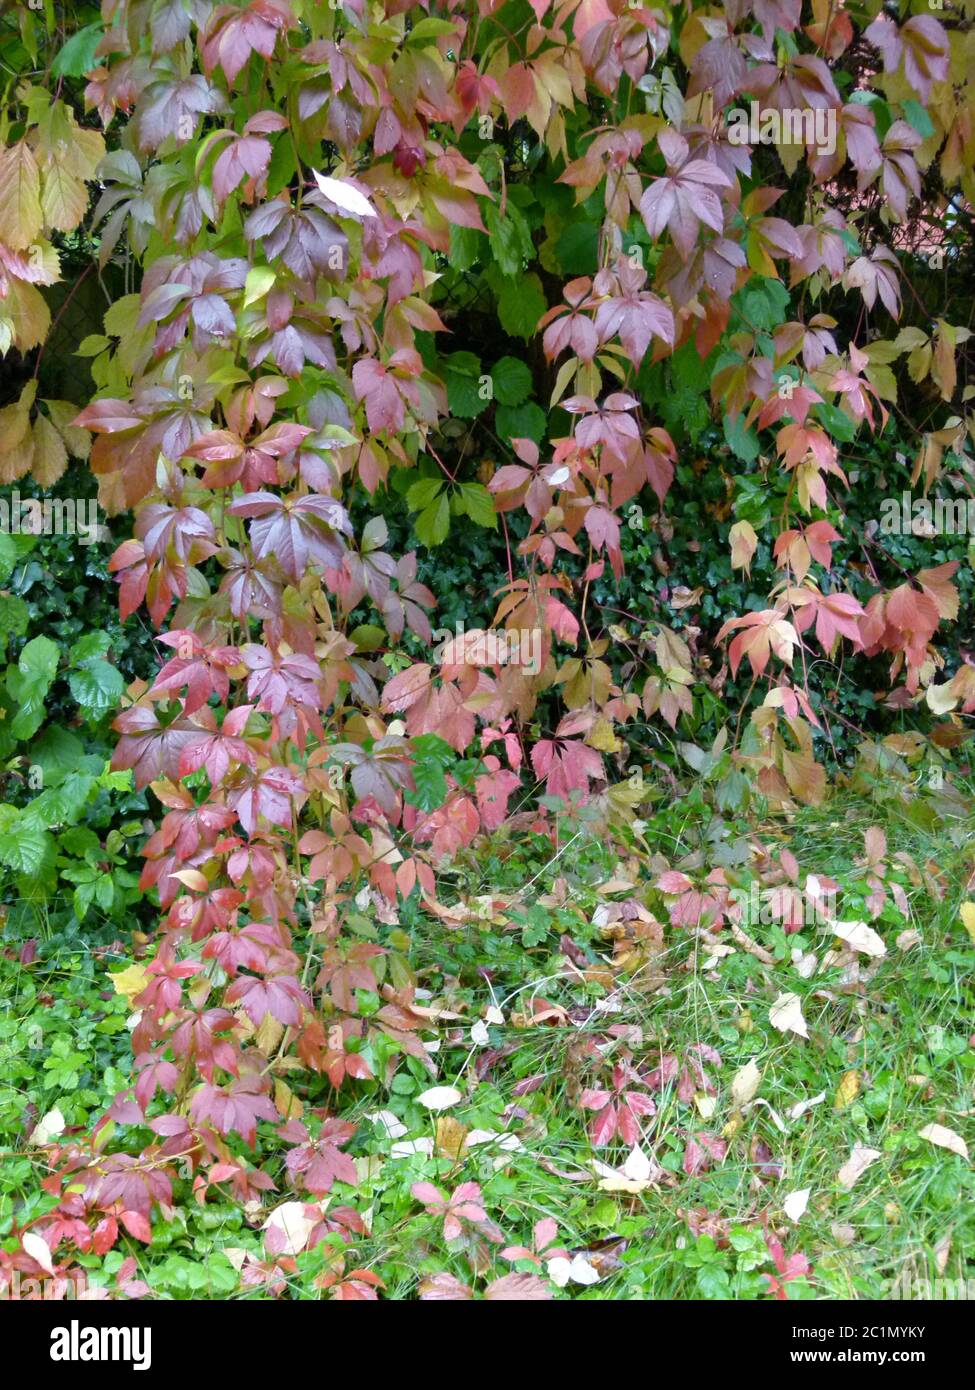 Reddish discolored ivy leaves overgrow the garden Stock Photo